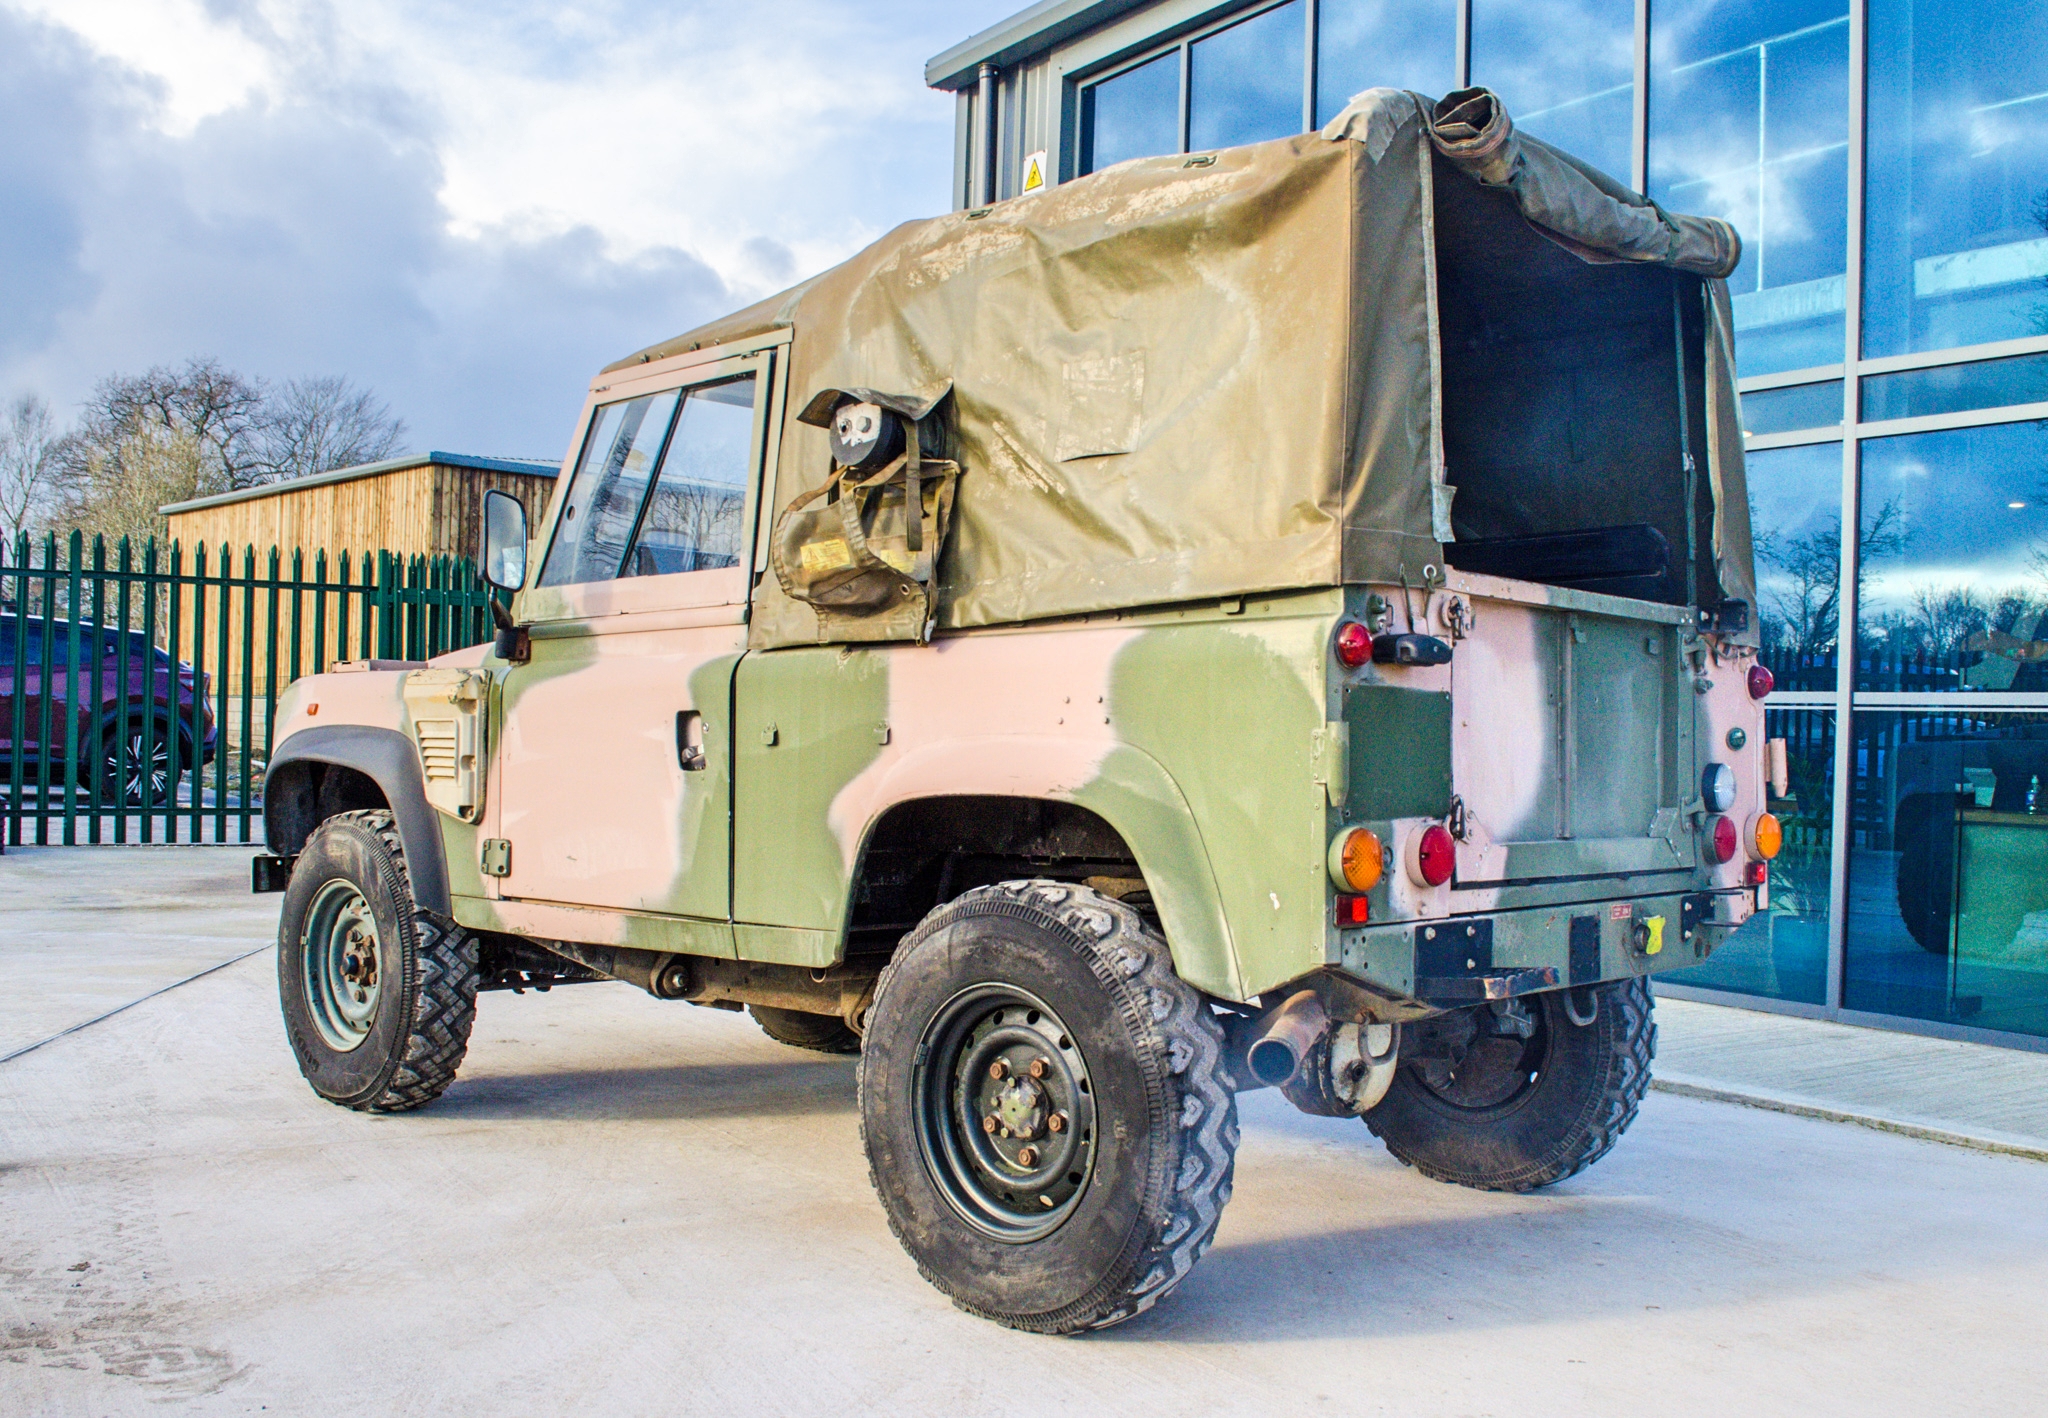 1998 Land Rover Defender 90 WOLF 2,5 litre 300TDI 4 wheel drive utility vehicle Ex MOD - Image 5 of 44